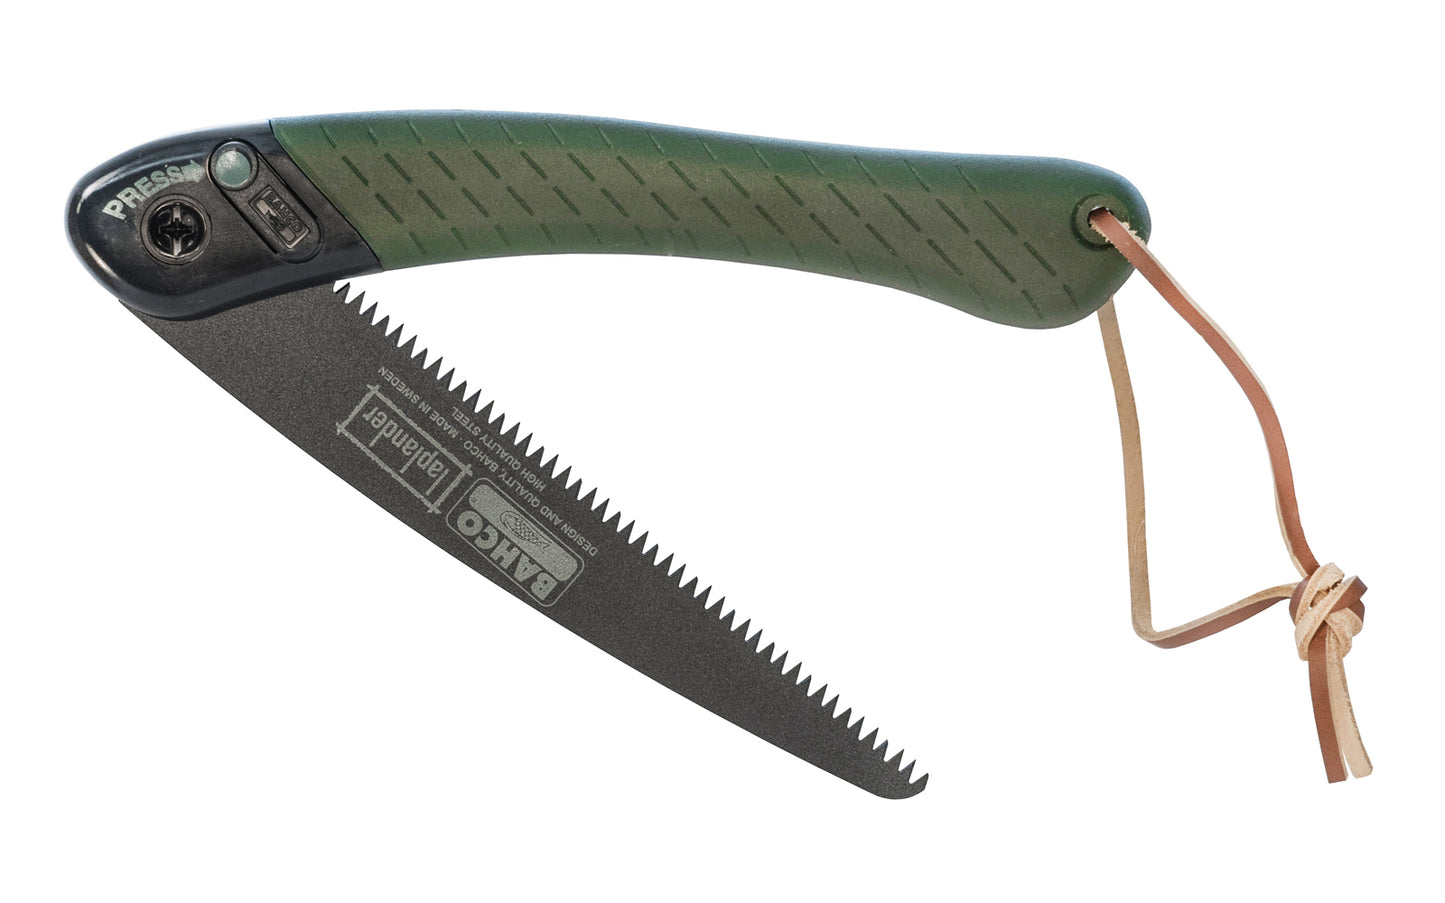 Made in Sweden - Bahco Lapplander Folding Saw - XT hardpoint Teething - Crosscut Teeth: 7 TPI - Outdoor Lapplander Saw - Garden Saw - Bushcraft Saw - 396-LAP - Model 396 - 7311518172367 - Bahco Folding Saw - Coarse Pull Saw - Good for green & dry woods, plastic, bone - For wildlife enthusiasts, hunters & campers